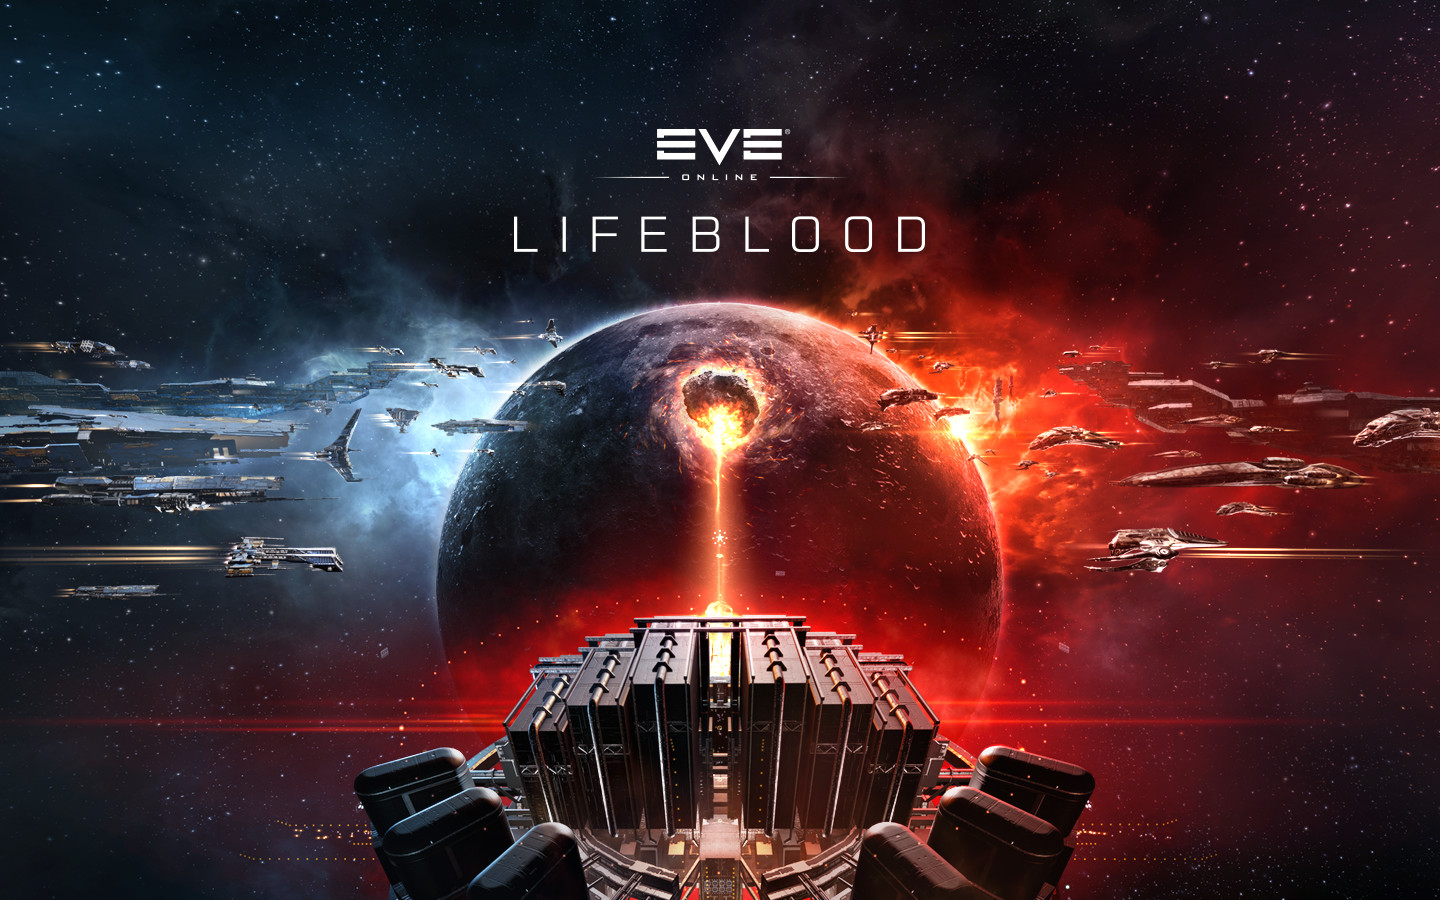 eve online wallpaper,movie,poster,space,album cover,universe